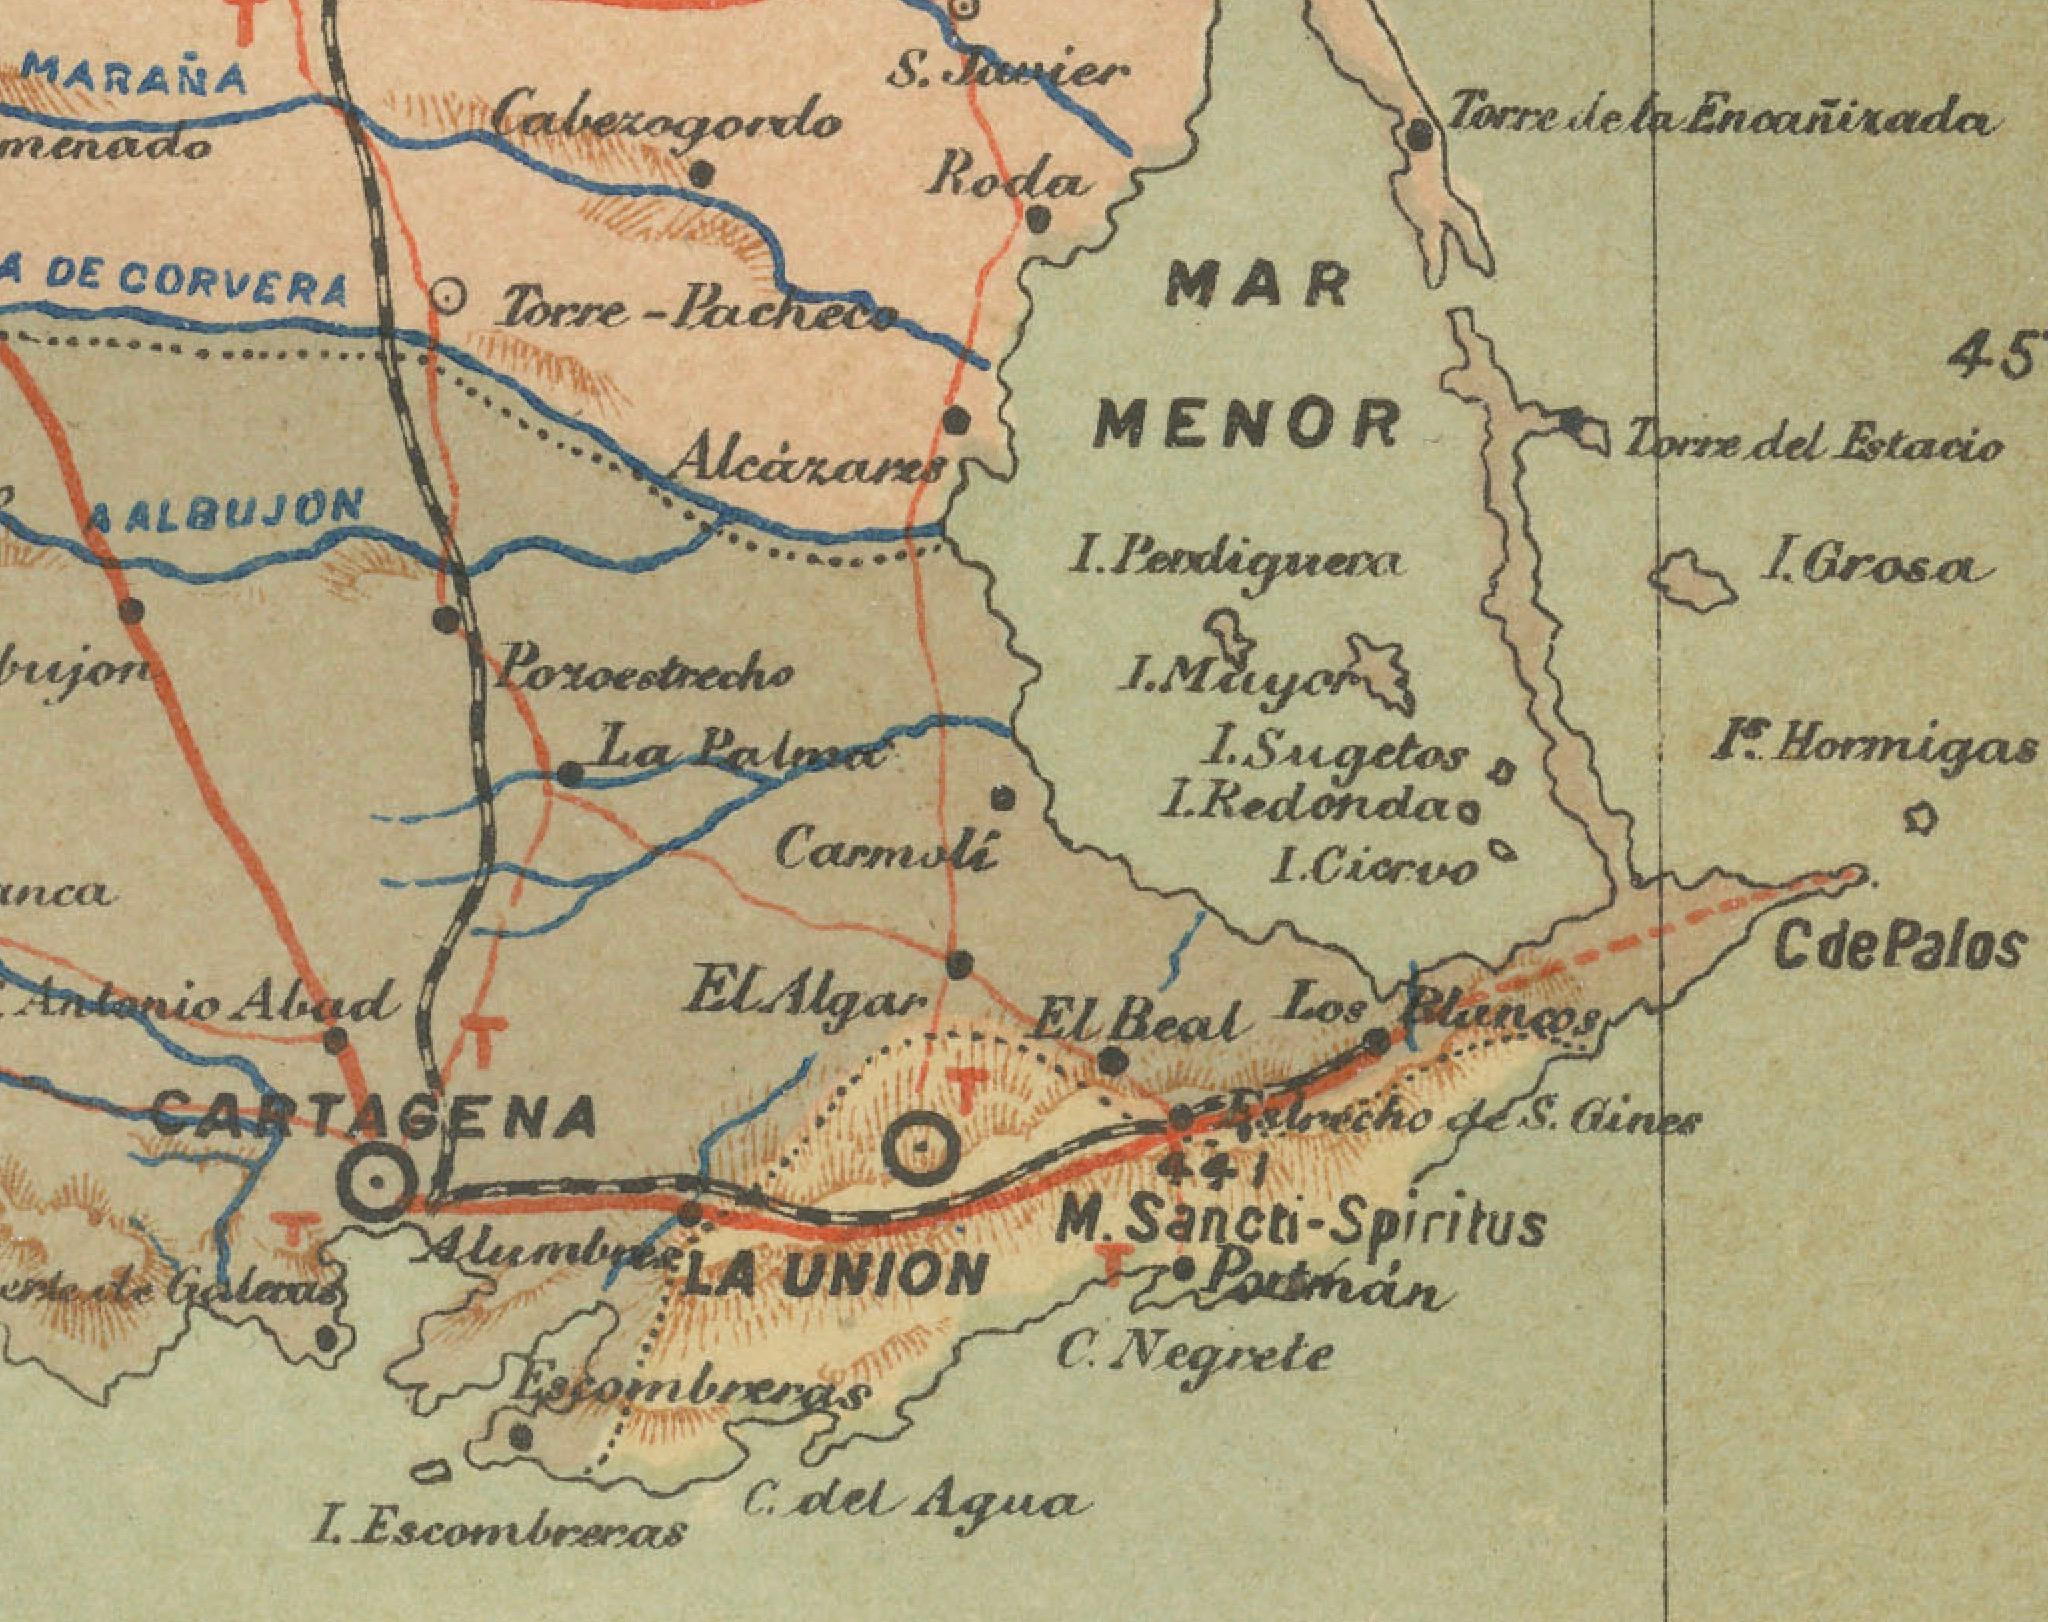 The map represents the province of Murcia, Spain, as it was in 1902. Here's an overview of its characteristics:

- **Geography**: It displays the varied terrain of Murcia, from the coastal plains to the internal mountain ranges.
- **Waterways**: